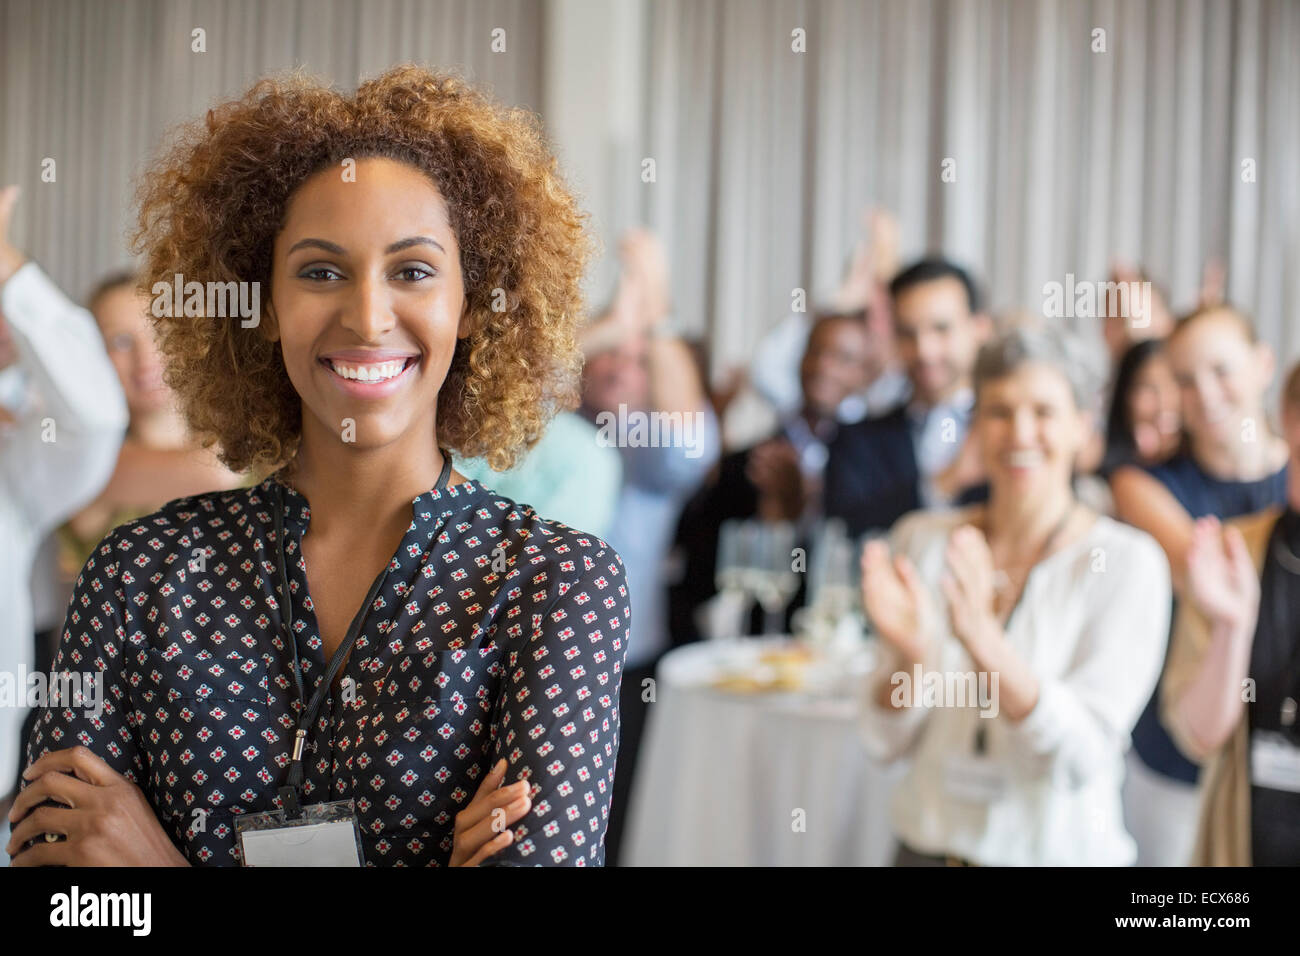 Portrait of smiling young woman in conference room with people applauding in background Stock Photo